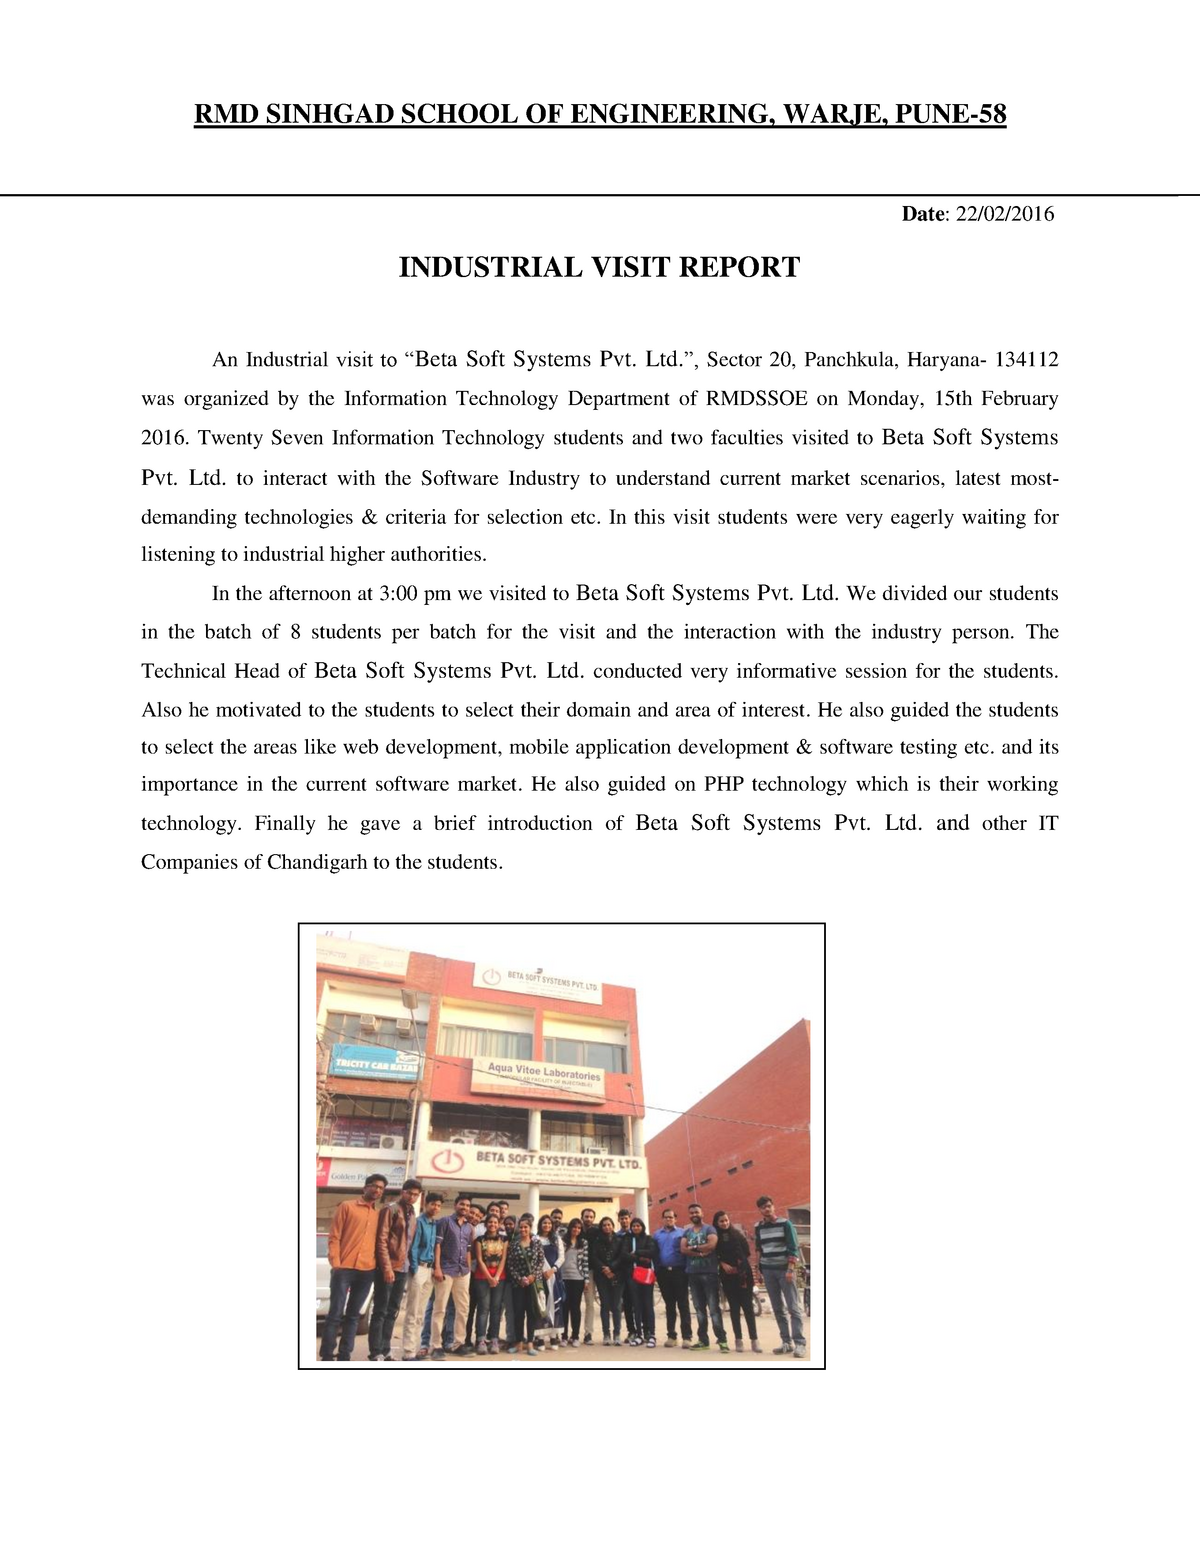 industrial visit report questions and answers